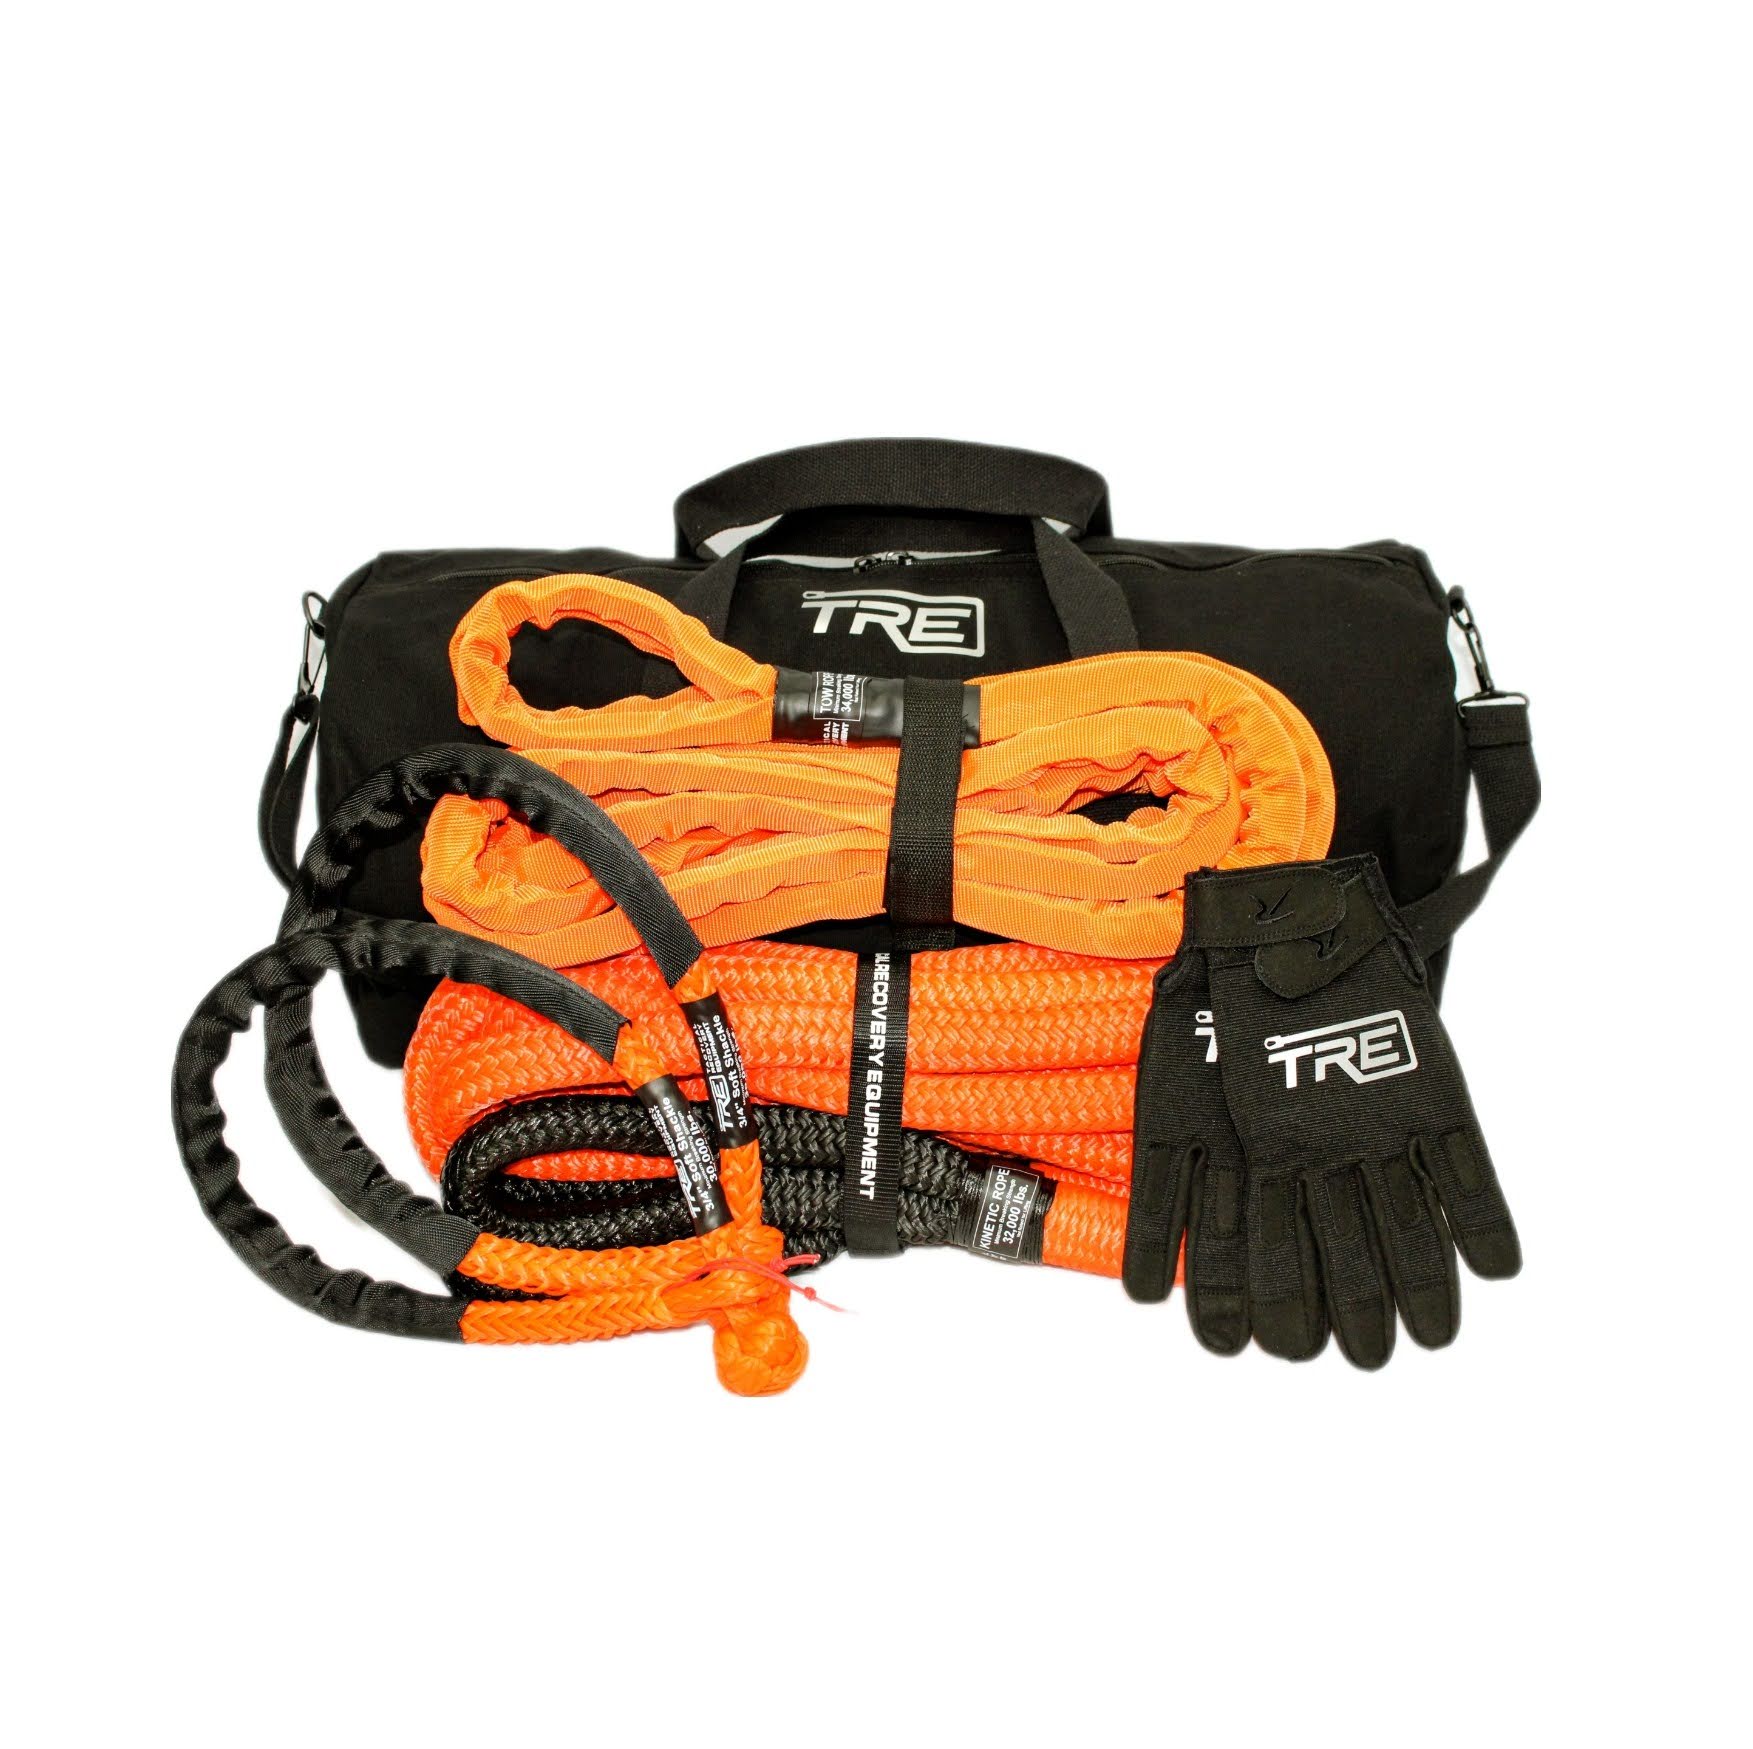 Truck Recovery Gear Kit - Vehicles up to 10,000 lbs. I TRE